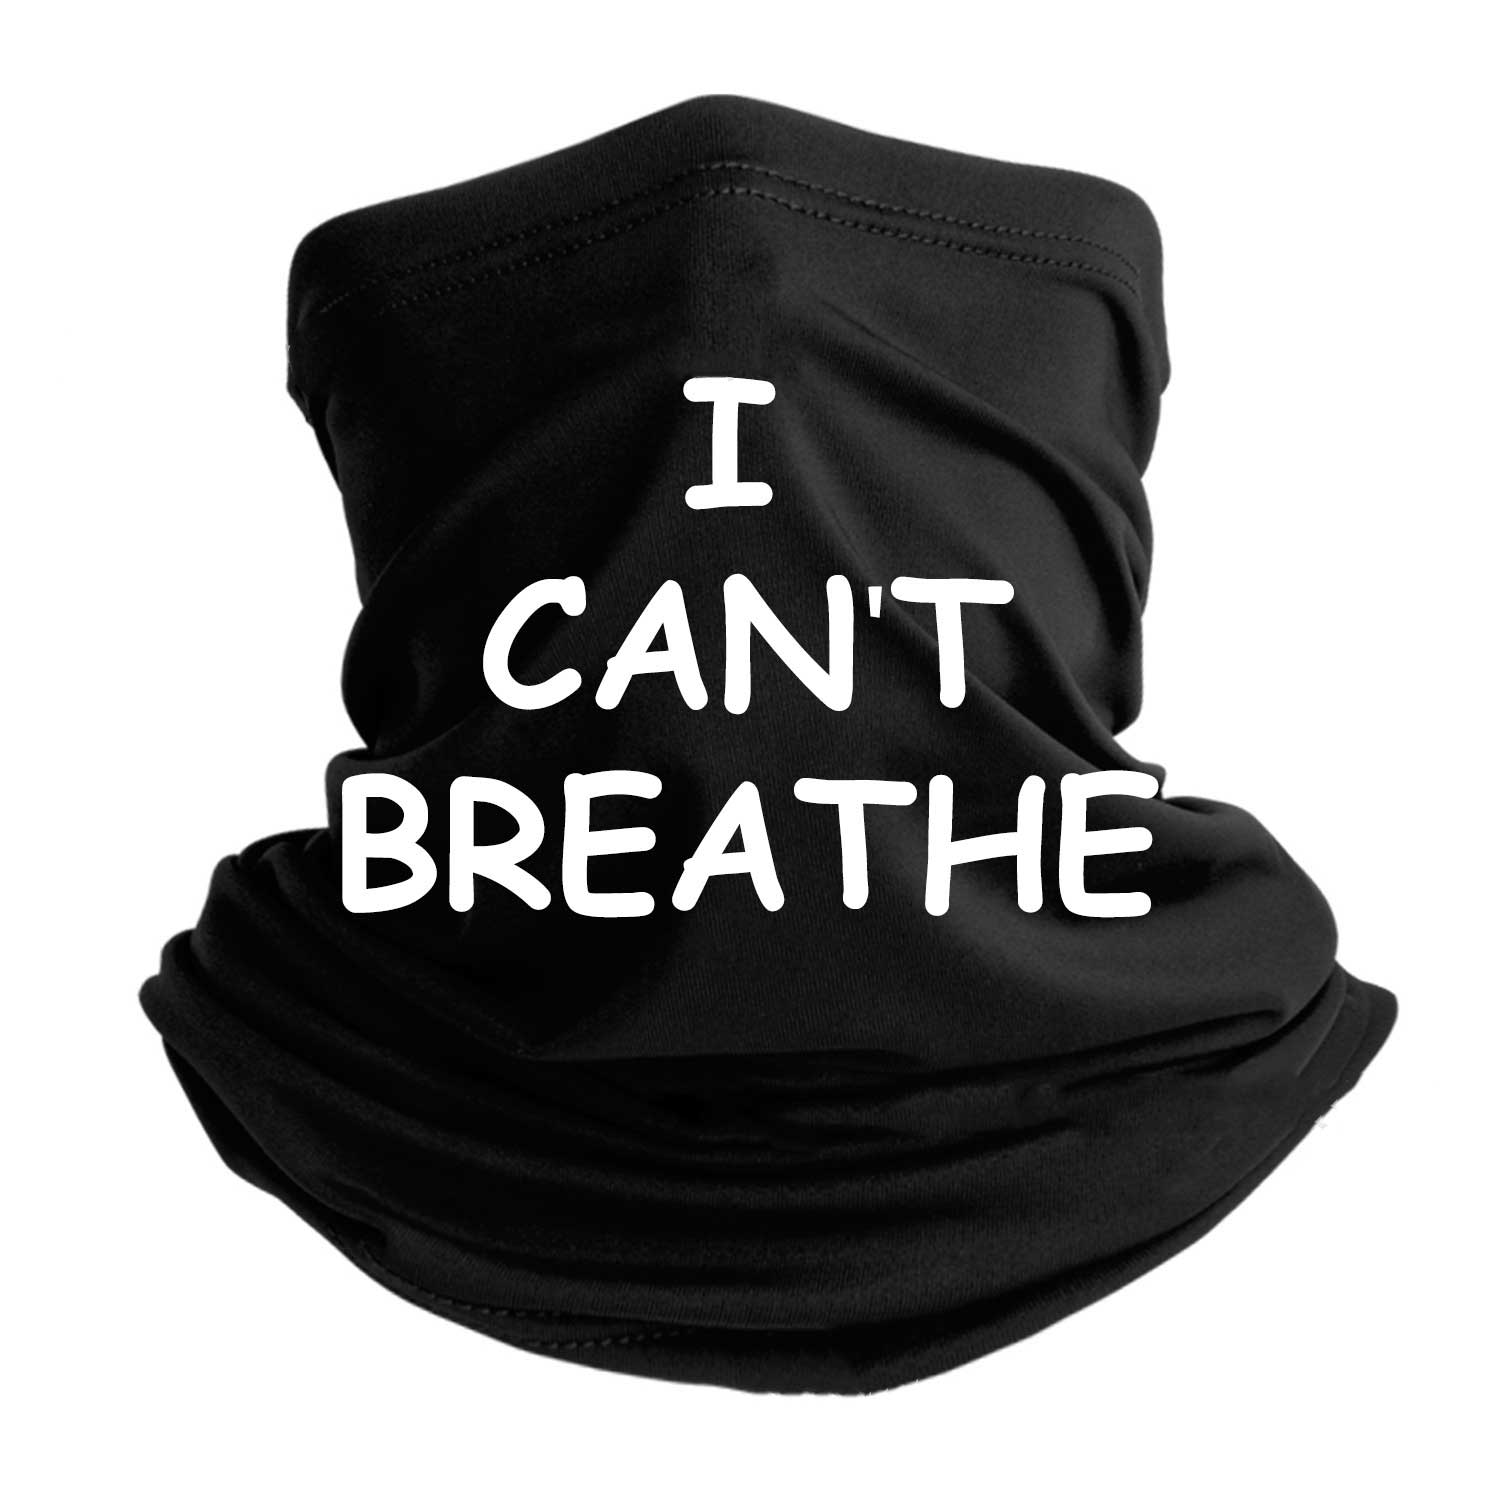 I Can't Breathe Outdoor Mouth Mask Windproof Sports Face Mask Dust Shield Scarf Men Woman Neck Warmer